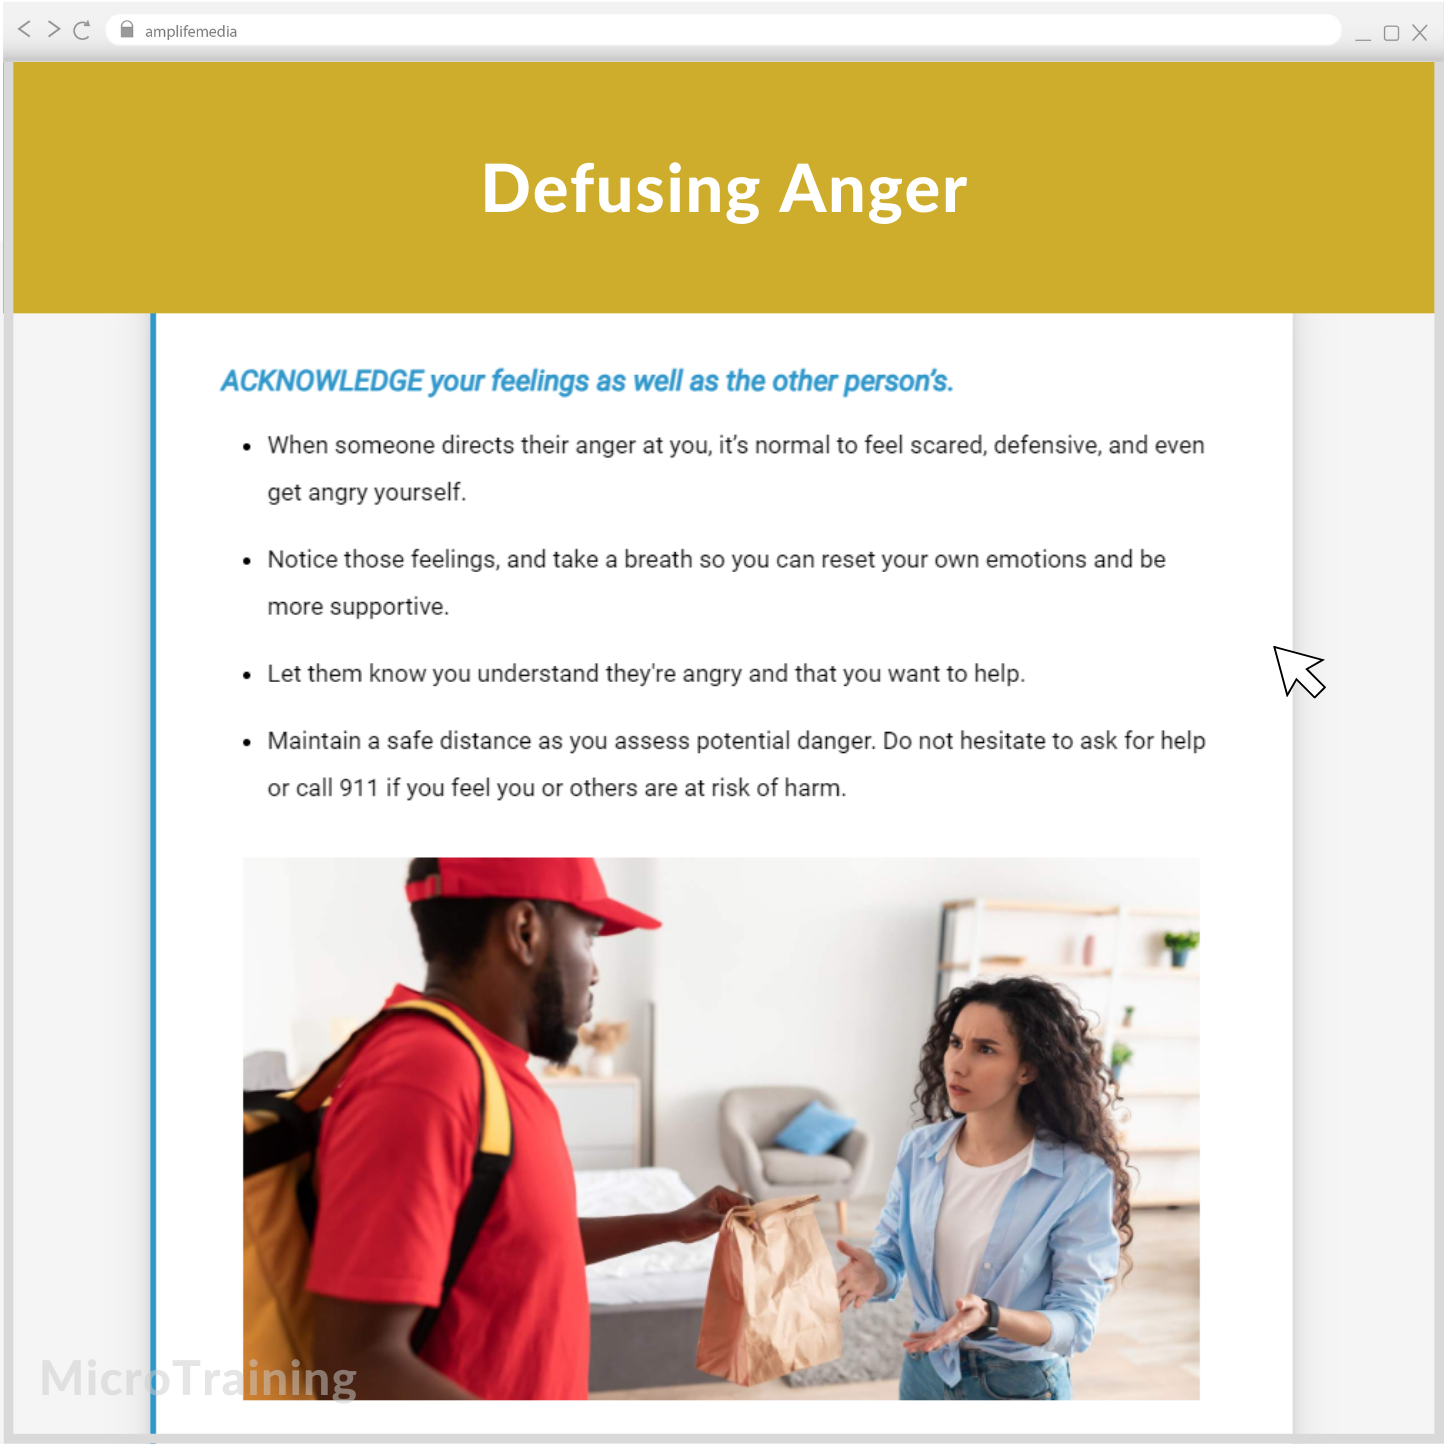 Subscription to Wellbeing Media: Defusing Anger MT 1222